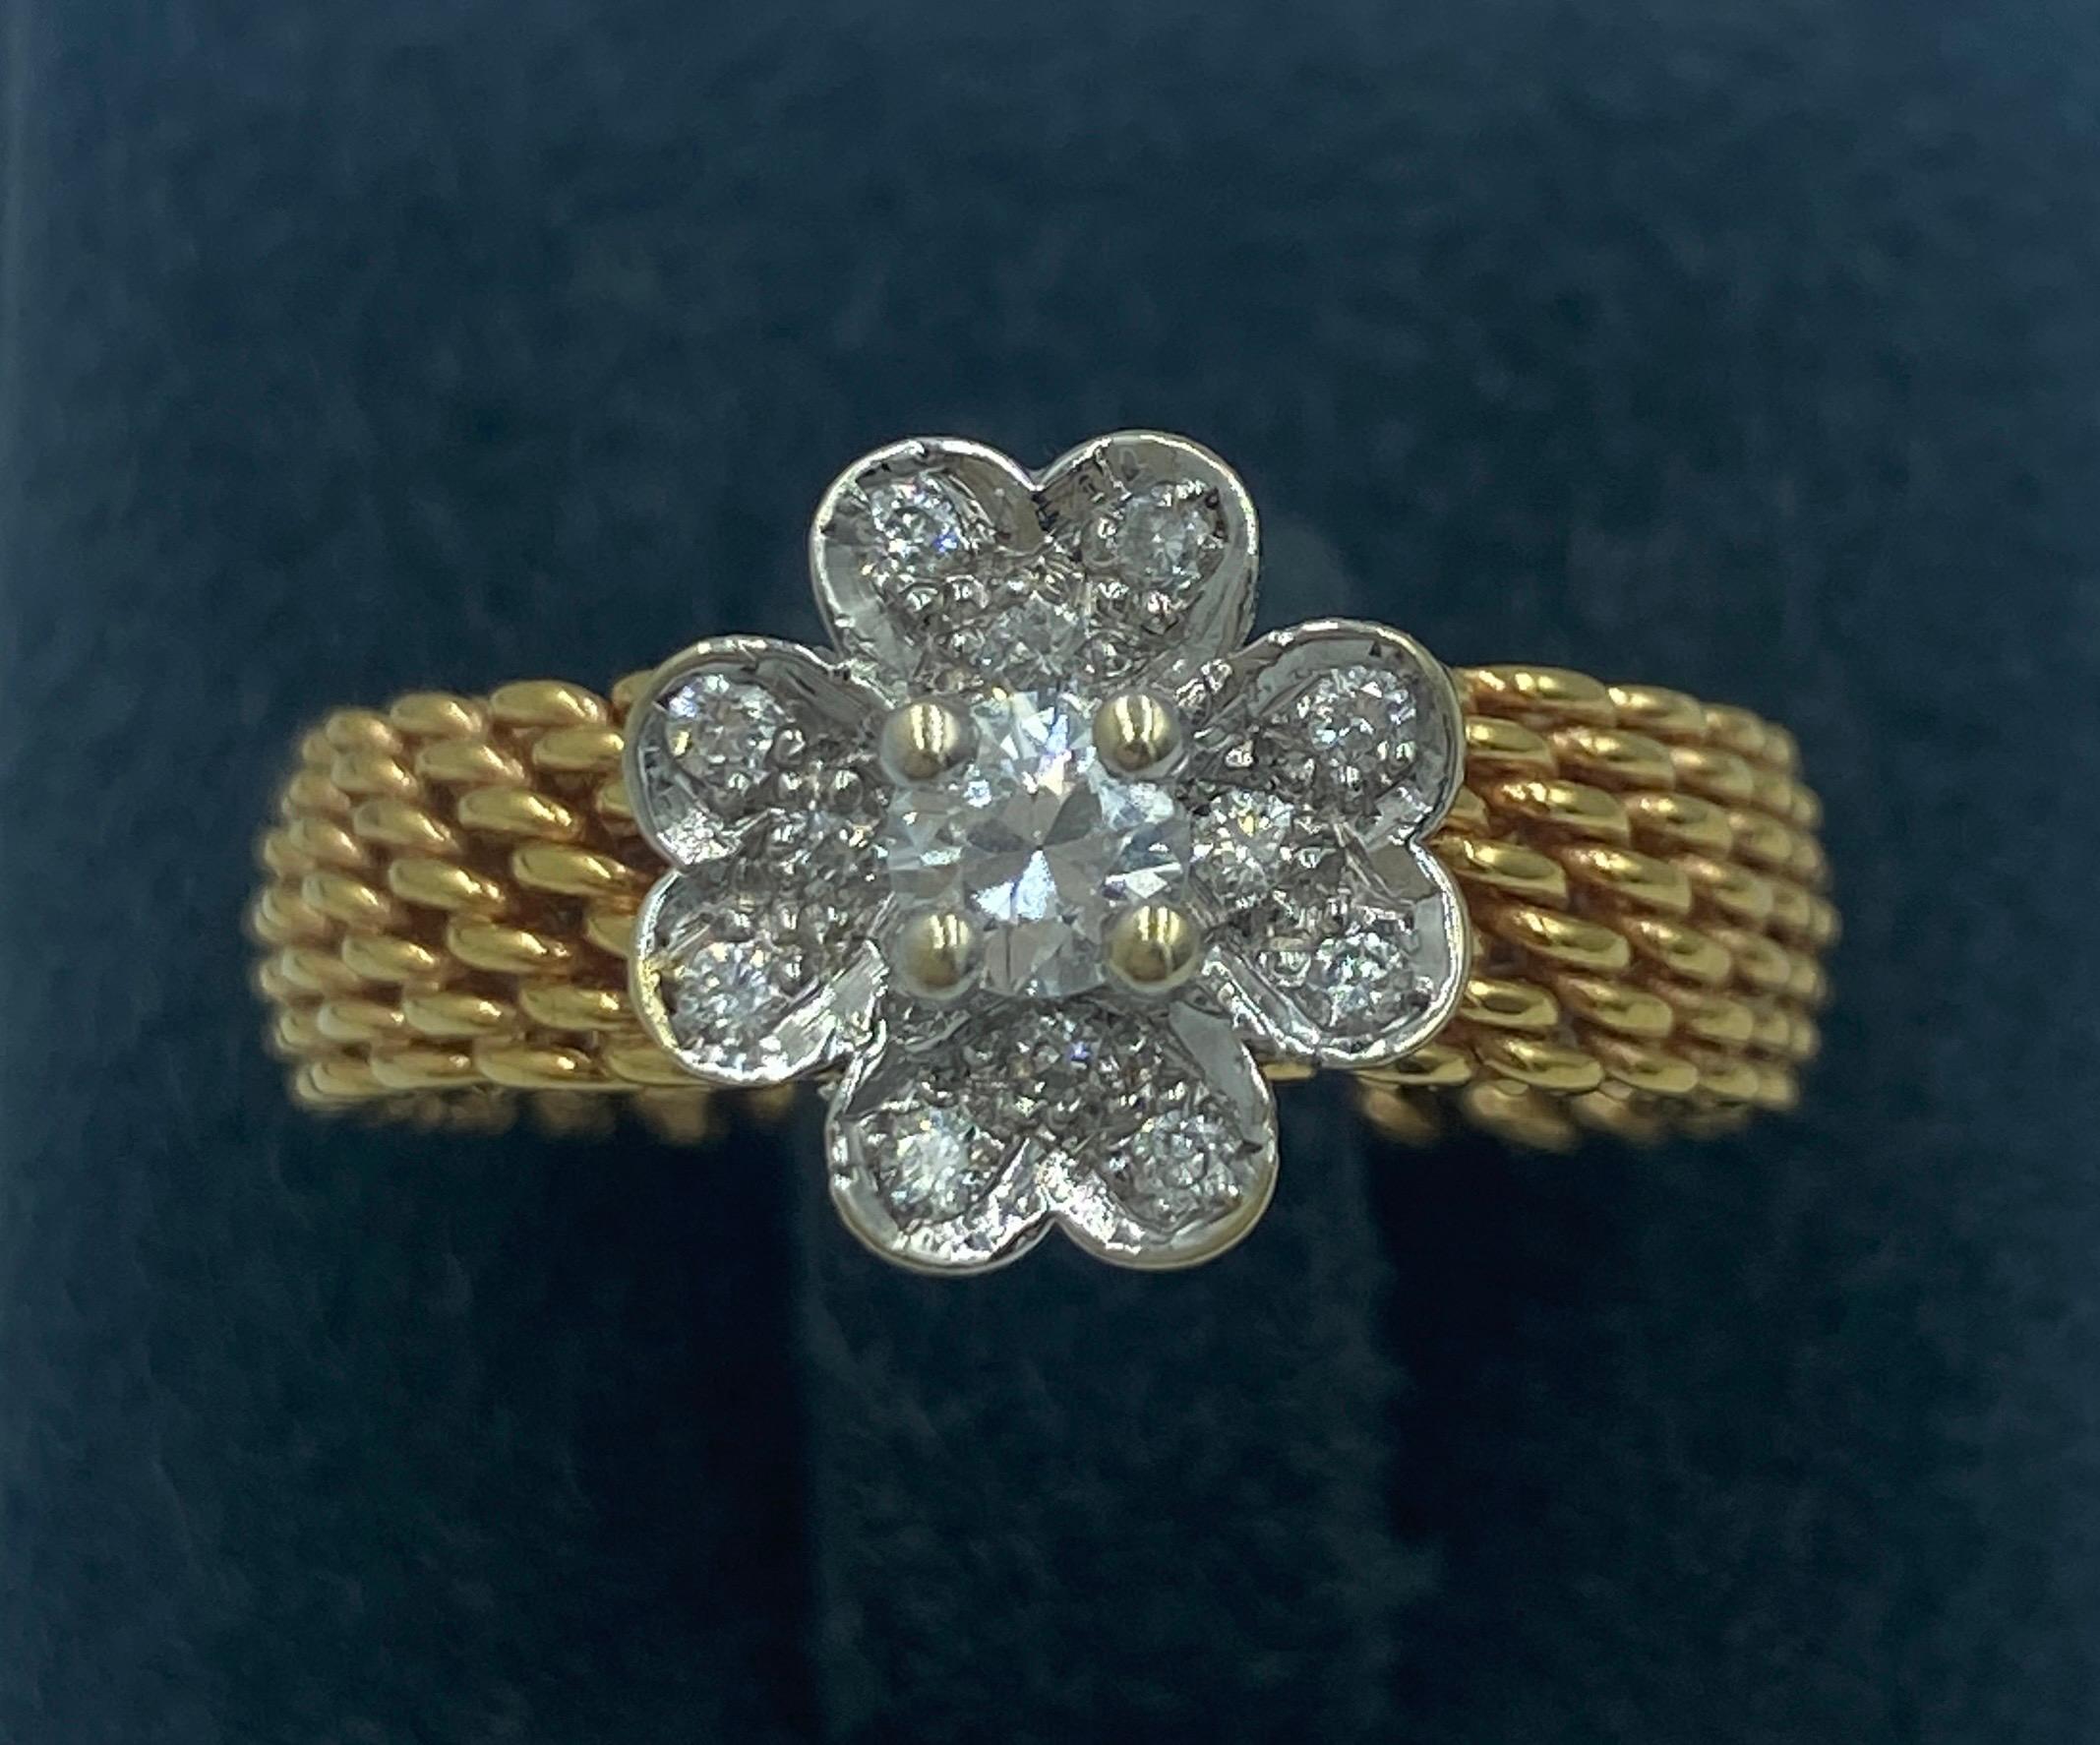 This Tiffany & Co ring belonging to the Somerset collection has the signature mesh 18 karat gold band but is adorned with a diamond flower. It is a delightful piece.